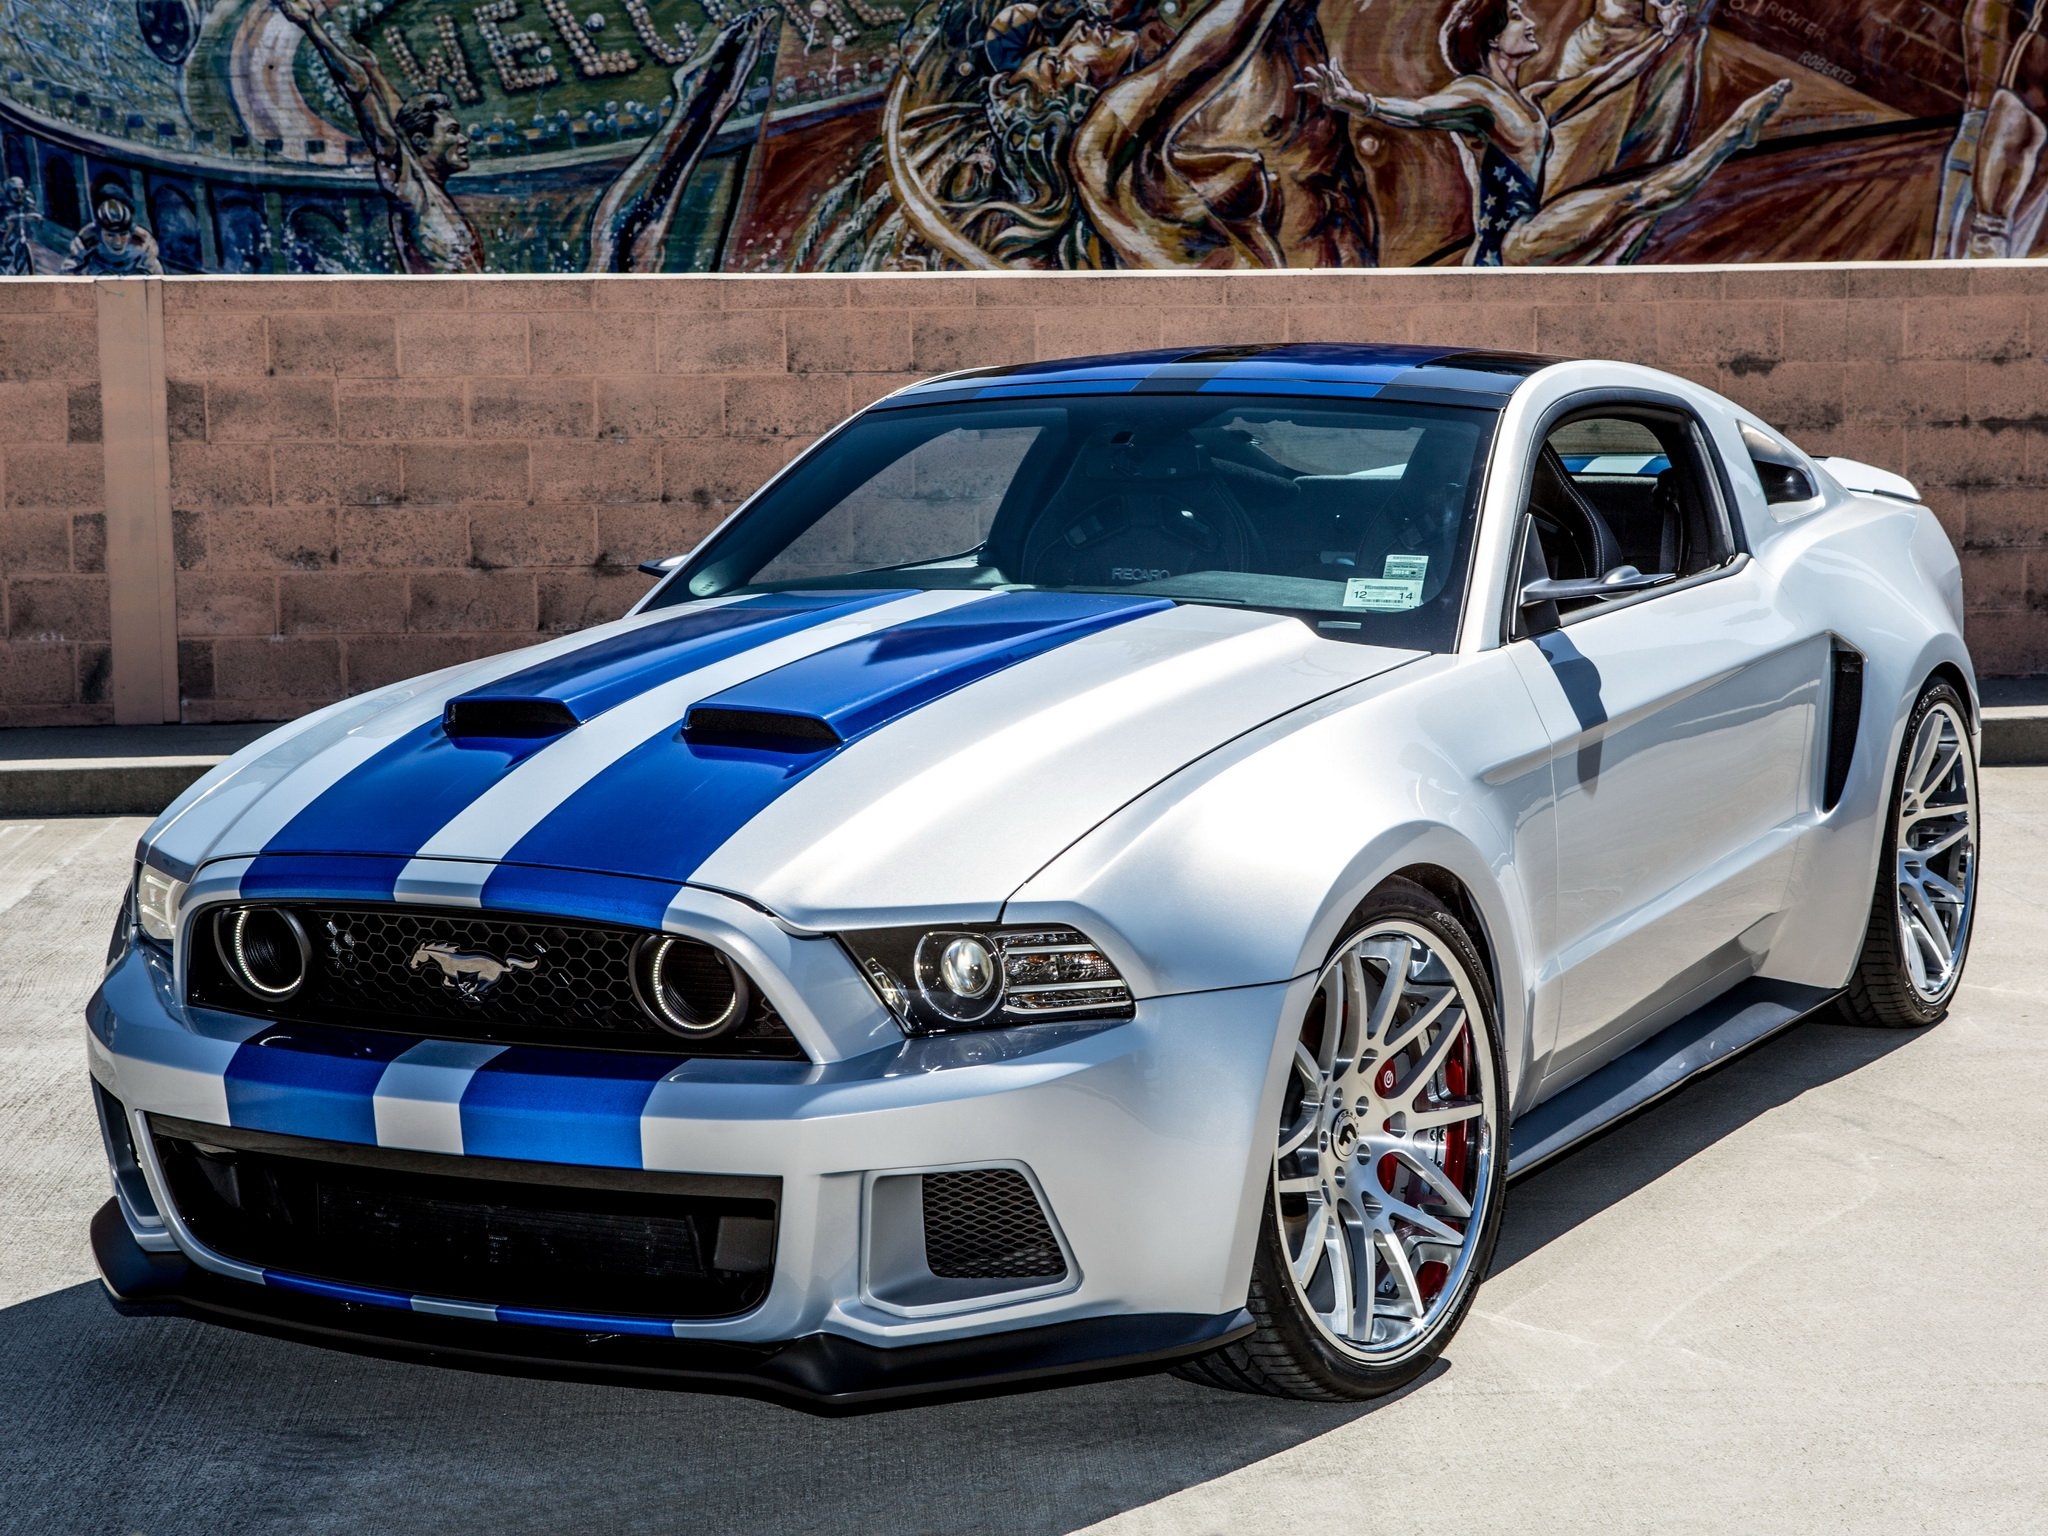 Wallpapers Ford Mustang Shelby muscle cars gray and blue on the desktop